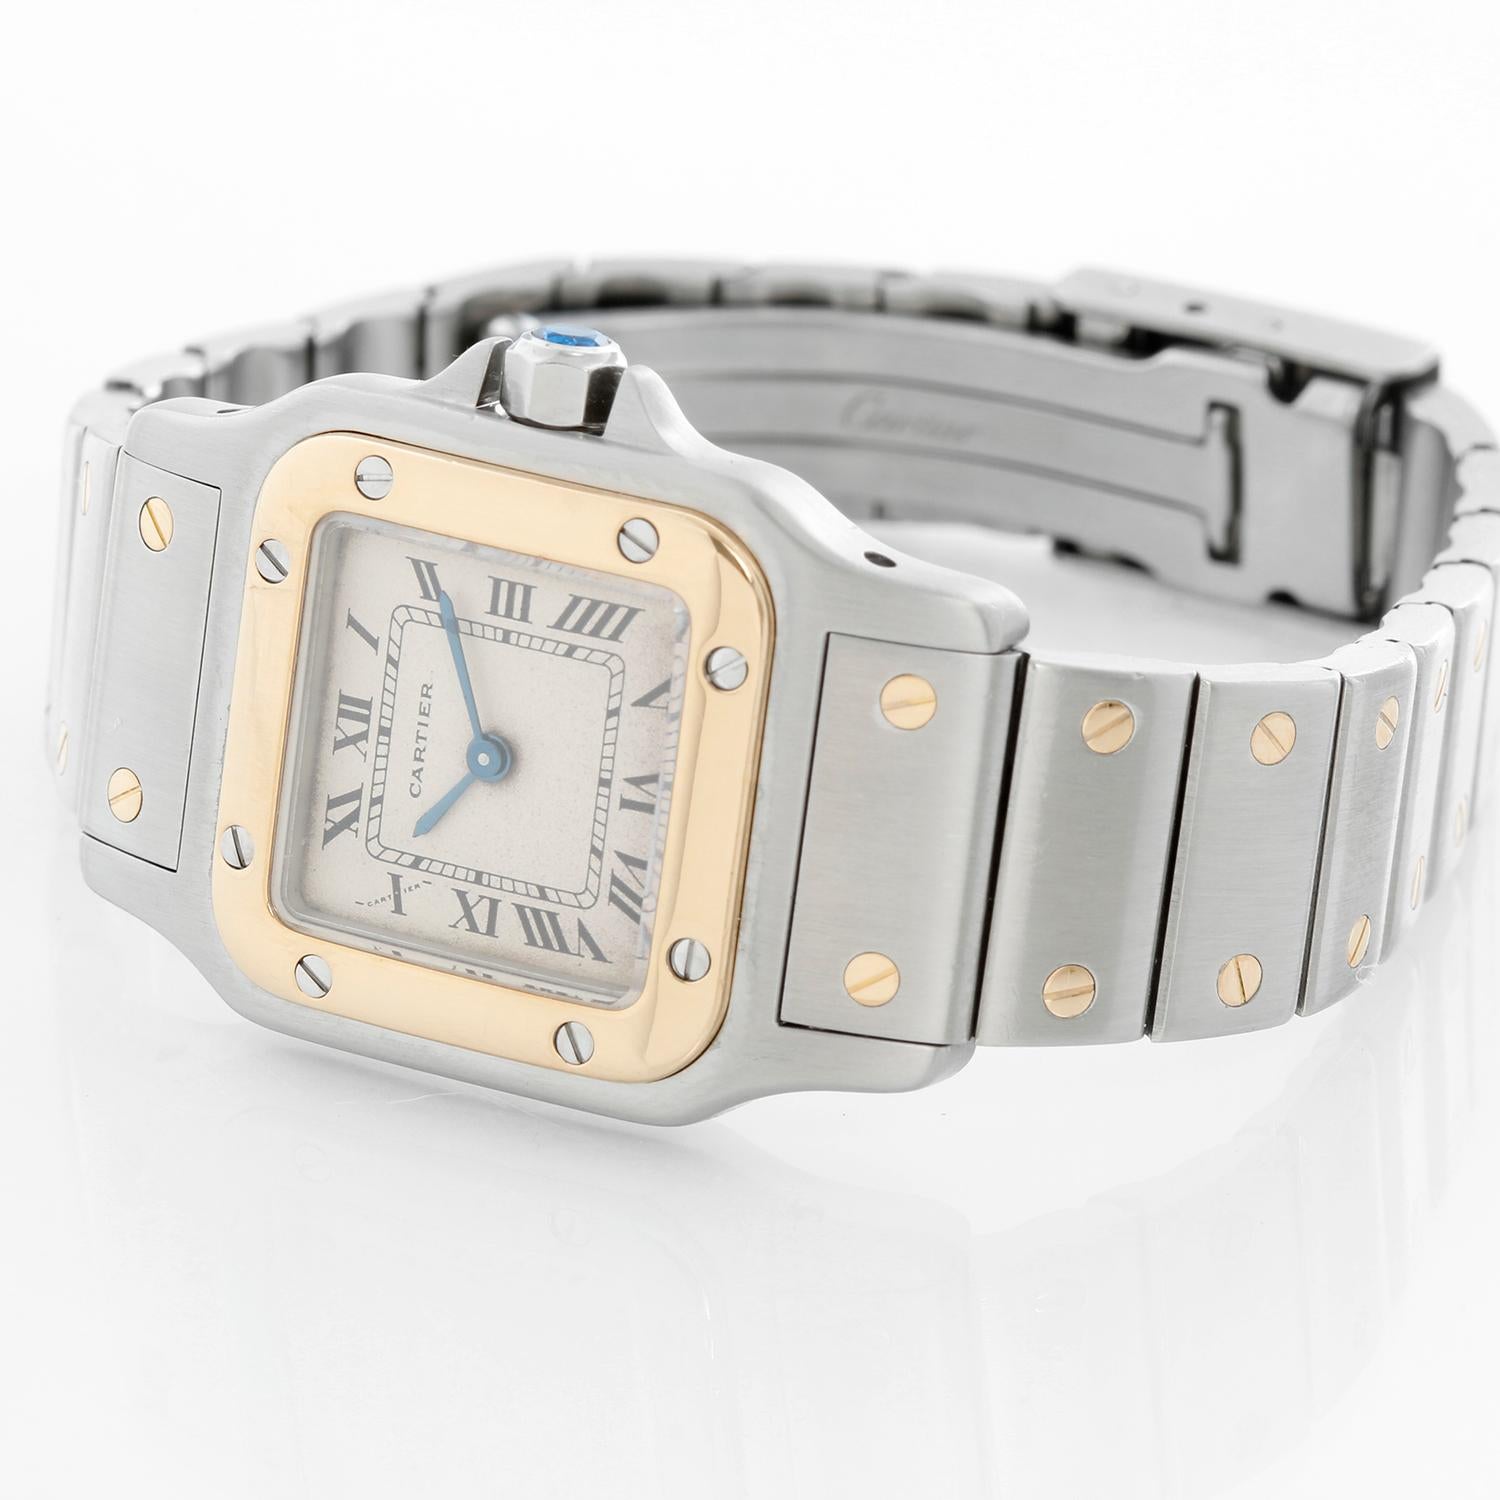 Cartier Santos Ladies 24mm Steel & Gold 2-Tone Quartz Watch - Quartz. Stainless steel case with 18k yellow gold bezel (24mm x 34mm ). Ivory dial with black roman numerals. Stainless steel bracelet with gold accents (will fit apx. 6-1/4-in. wrist).